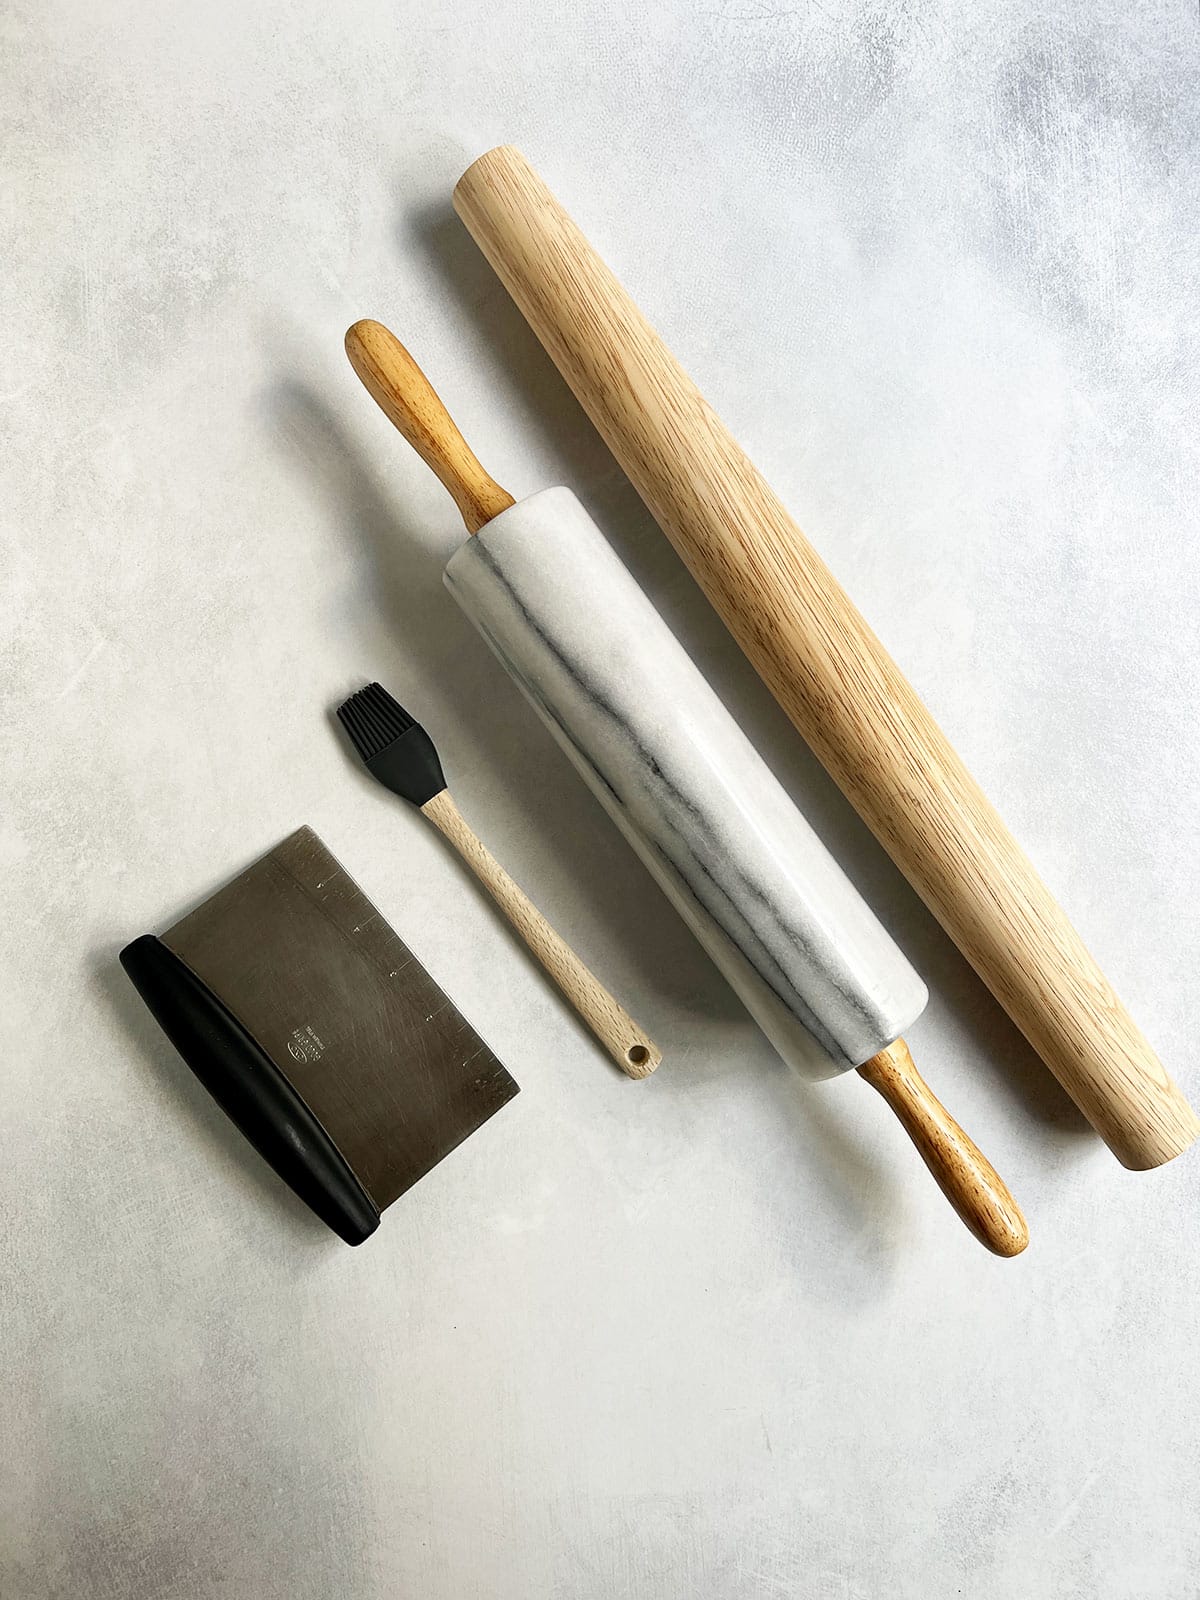 Tools that are helpful for making pie crust including a bench scraper, pastry brush, marble rolling pin and wooden rolling pin.